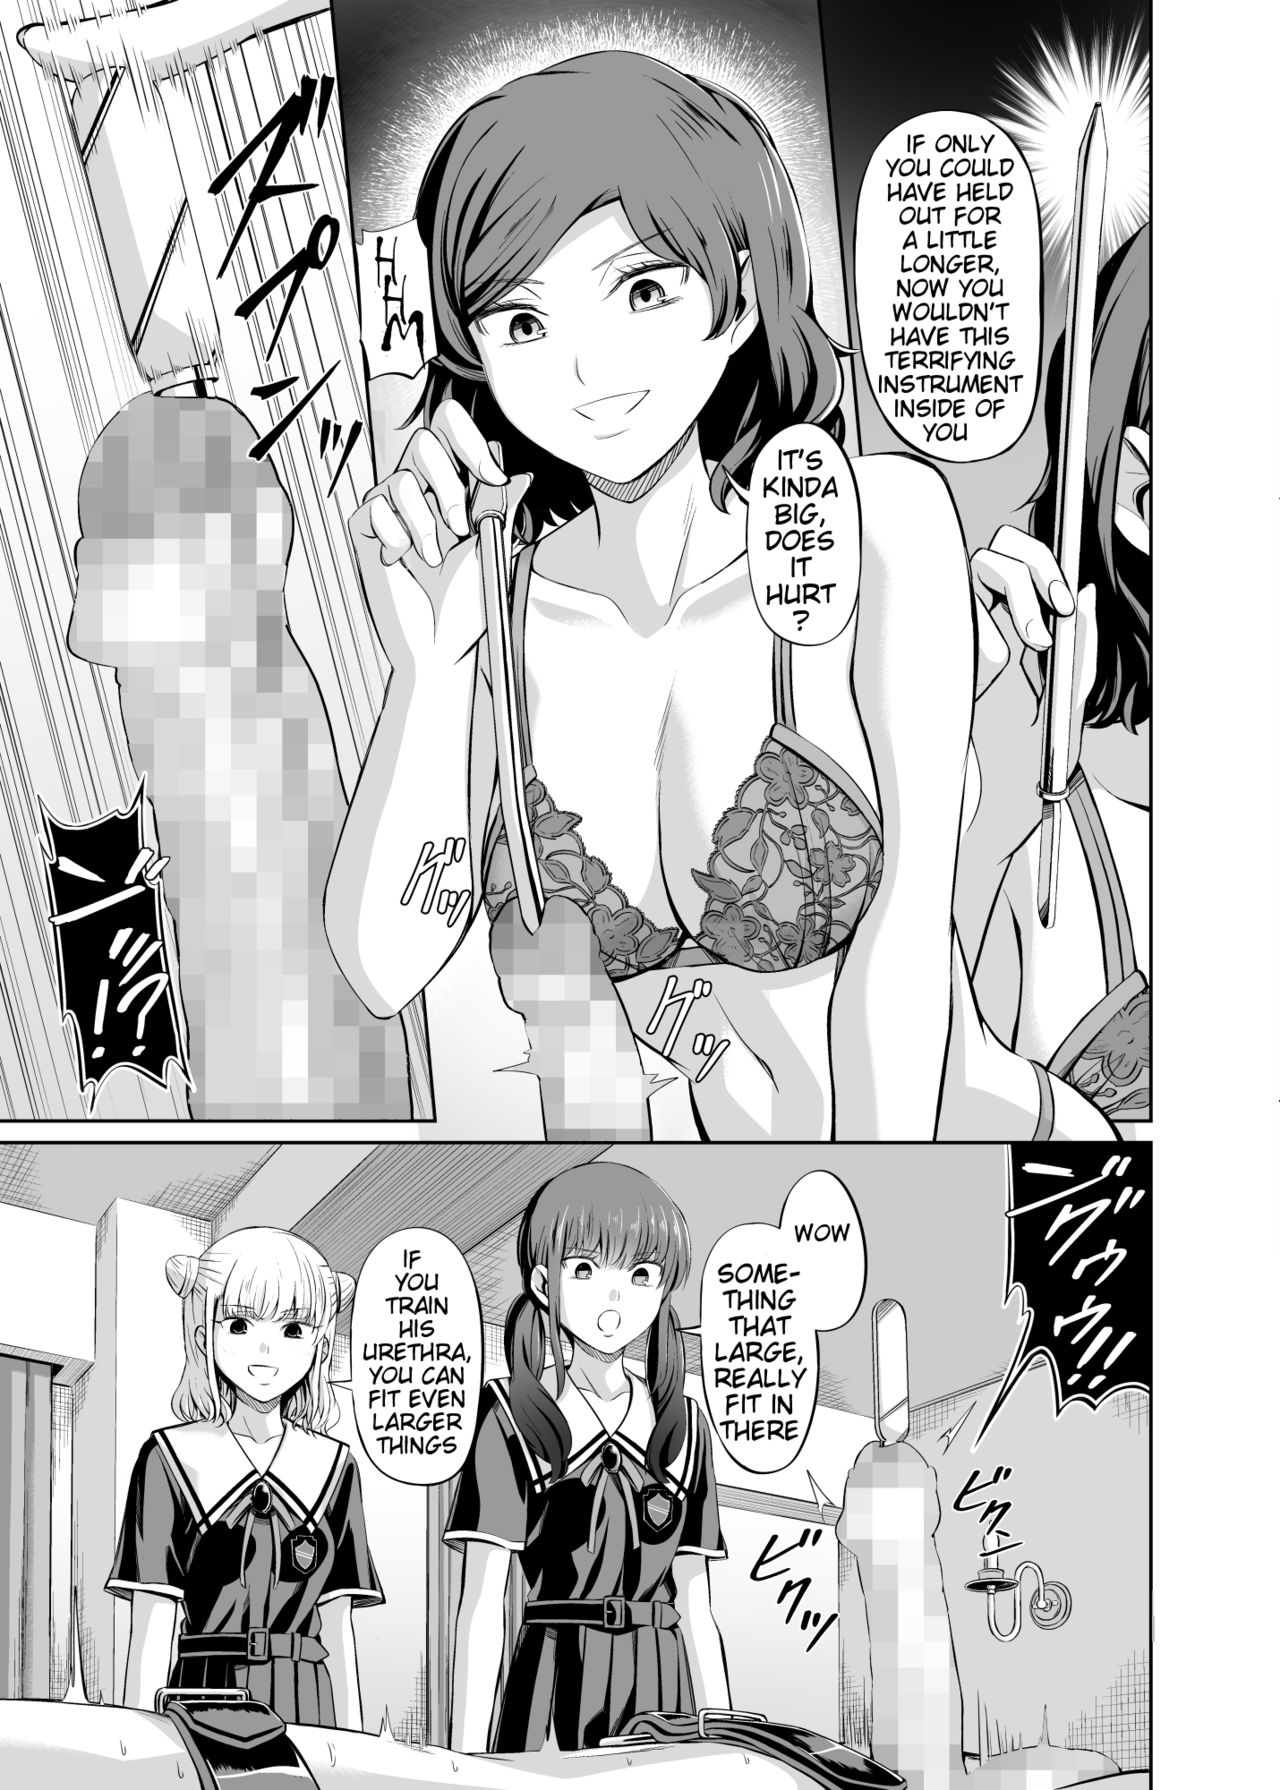 [Yamahata Rian] Tensuushugi no Kuni Kouhen | A Country Based on Point System Sequel [English] [Esoteric_Autist, klow82] page 17 full